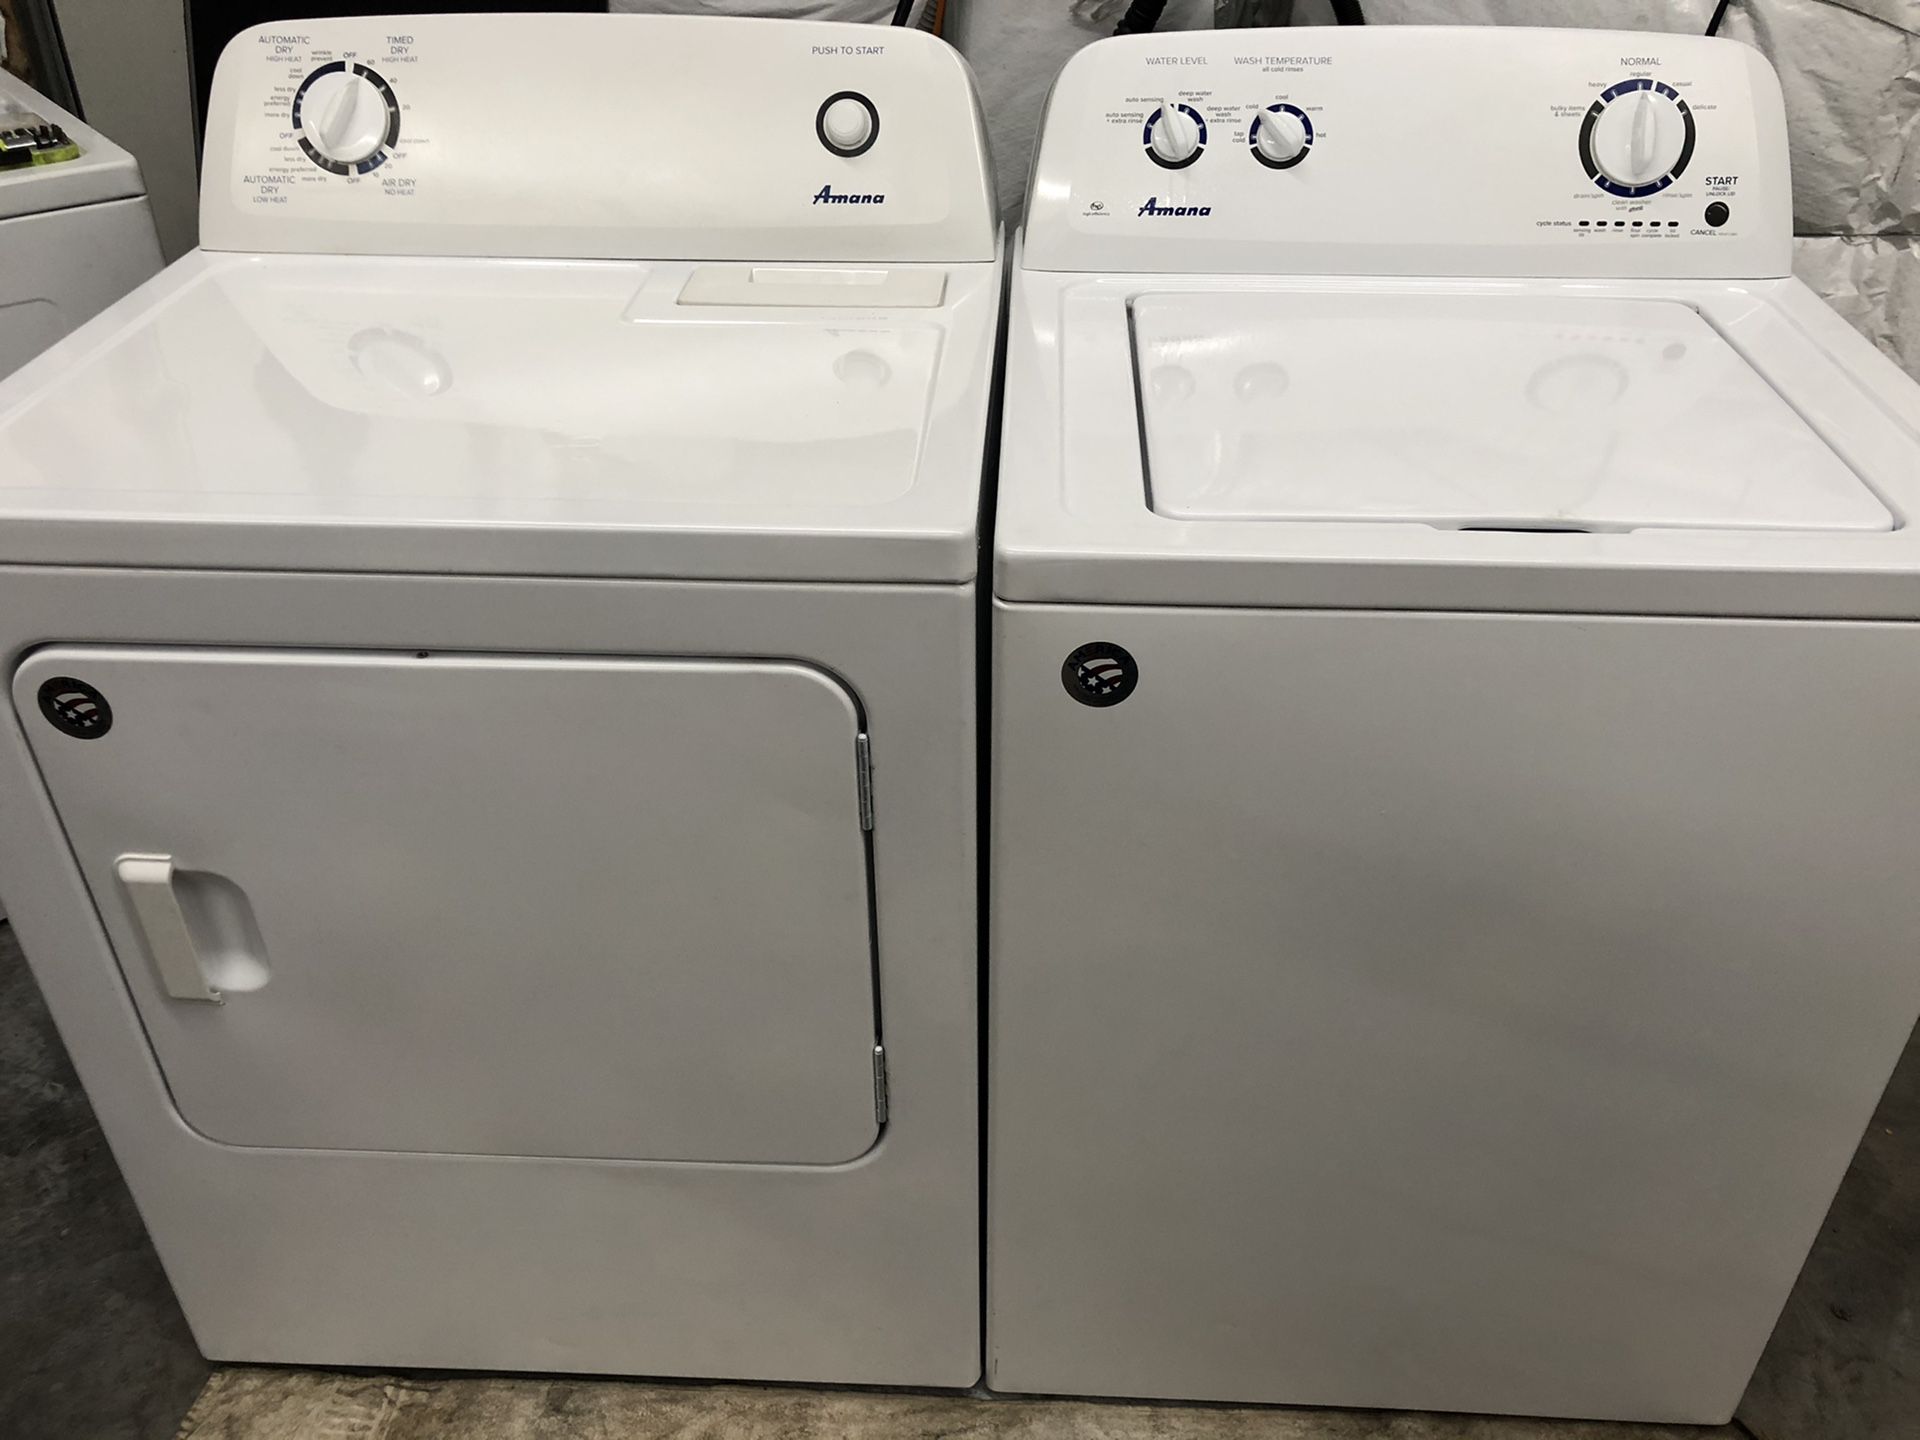 Amana Matching Washer and Dryer Set that CAN be delivered and set up